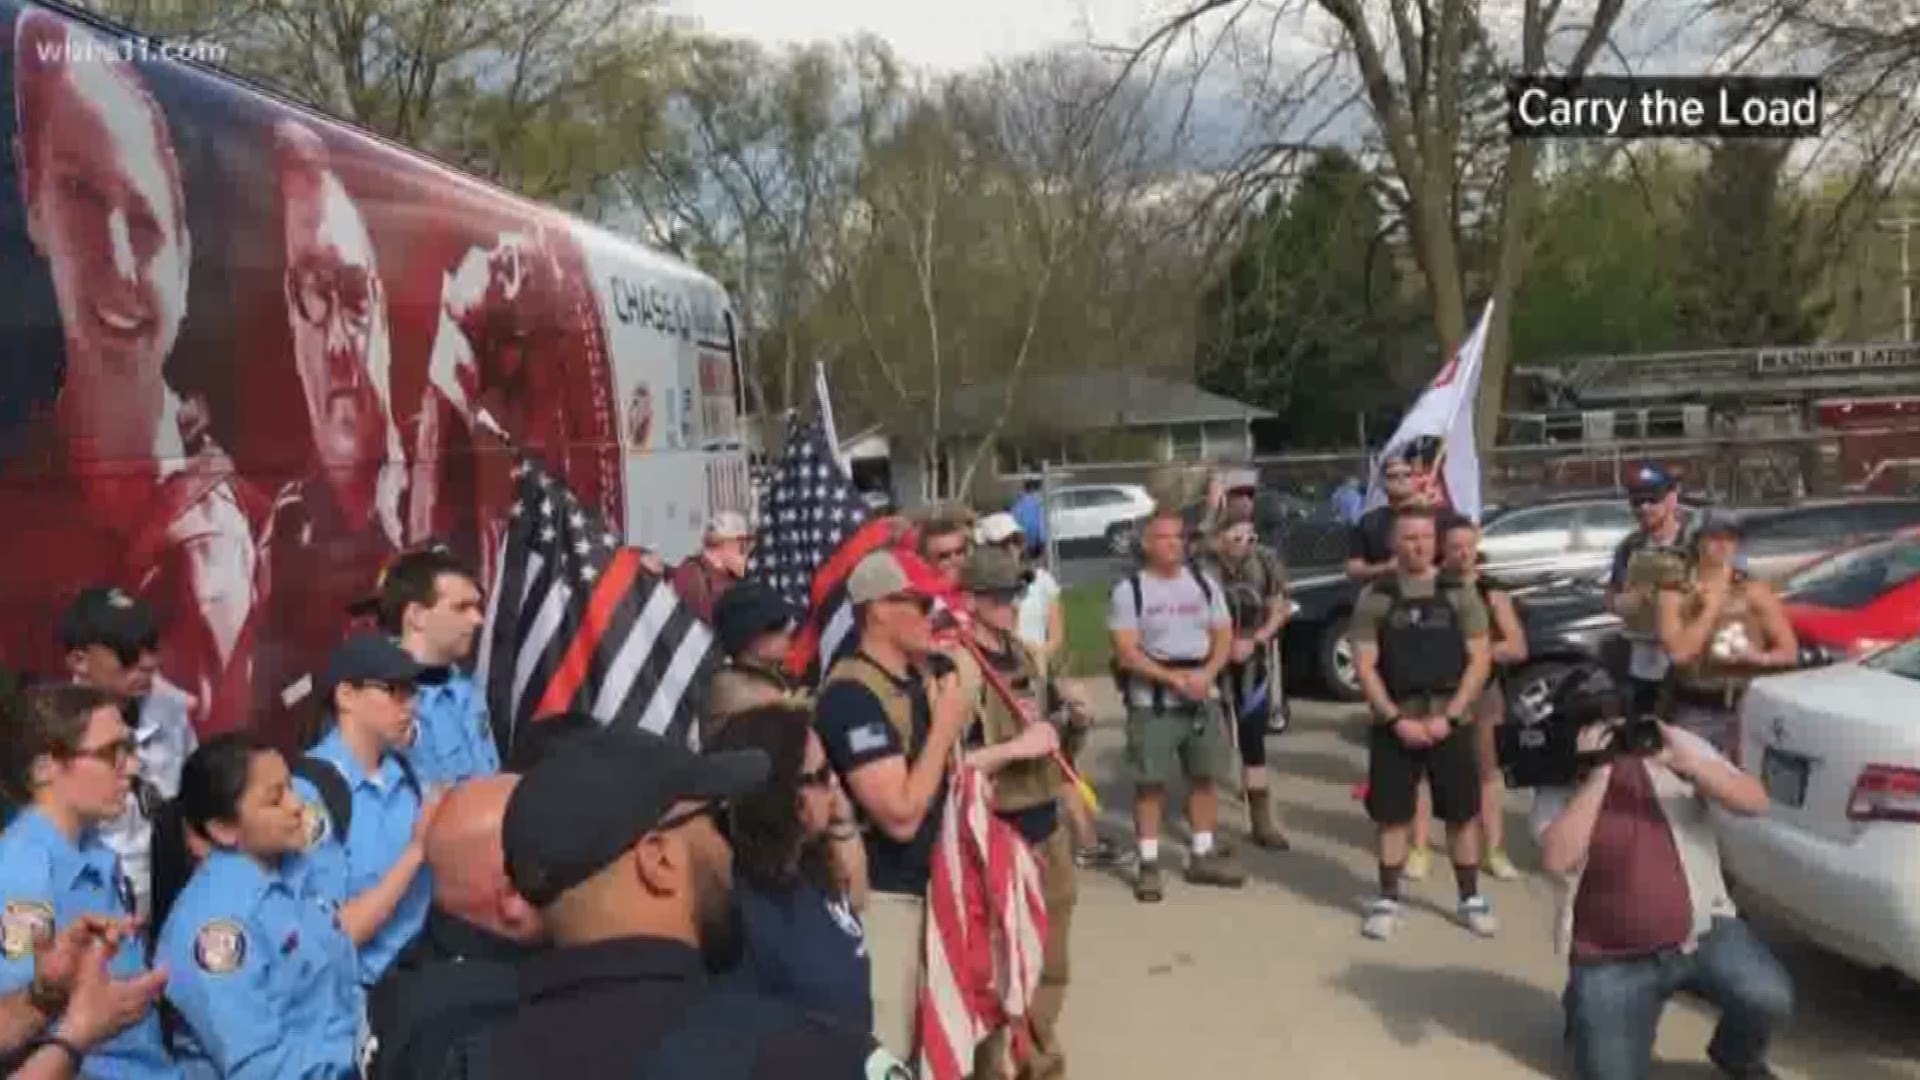 A 3,900-mile journey made by military veterans and first responders made a stop in Louisville.